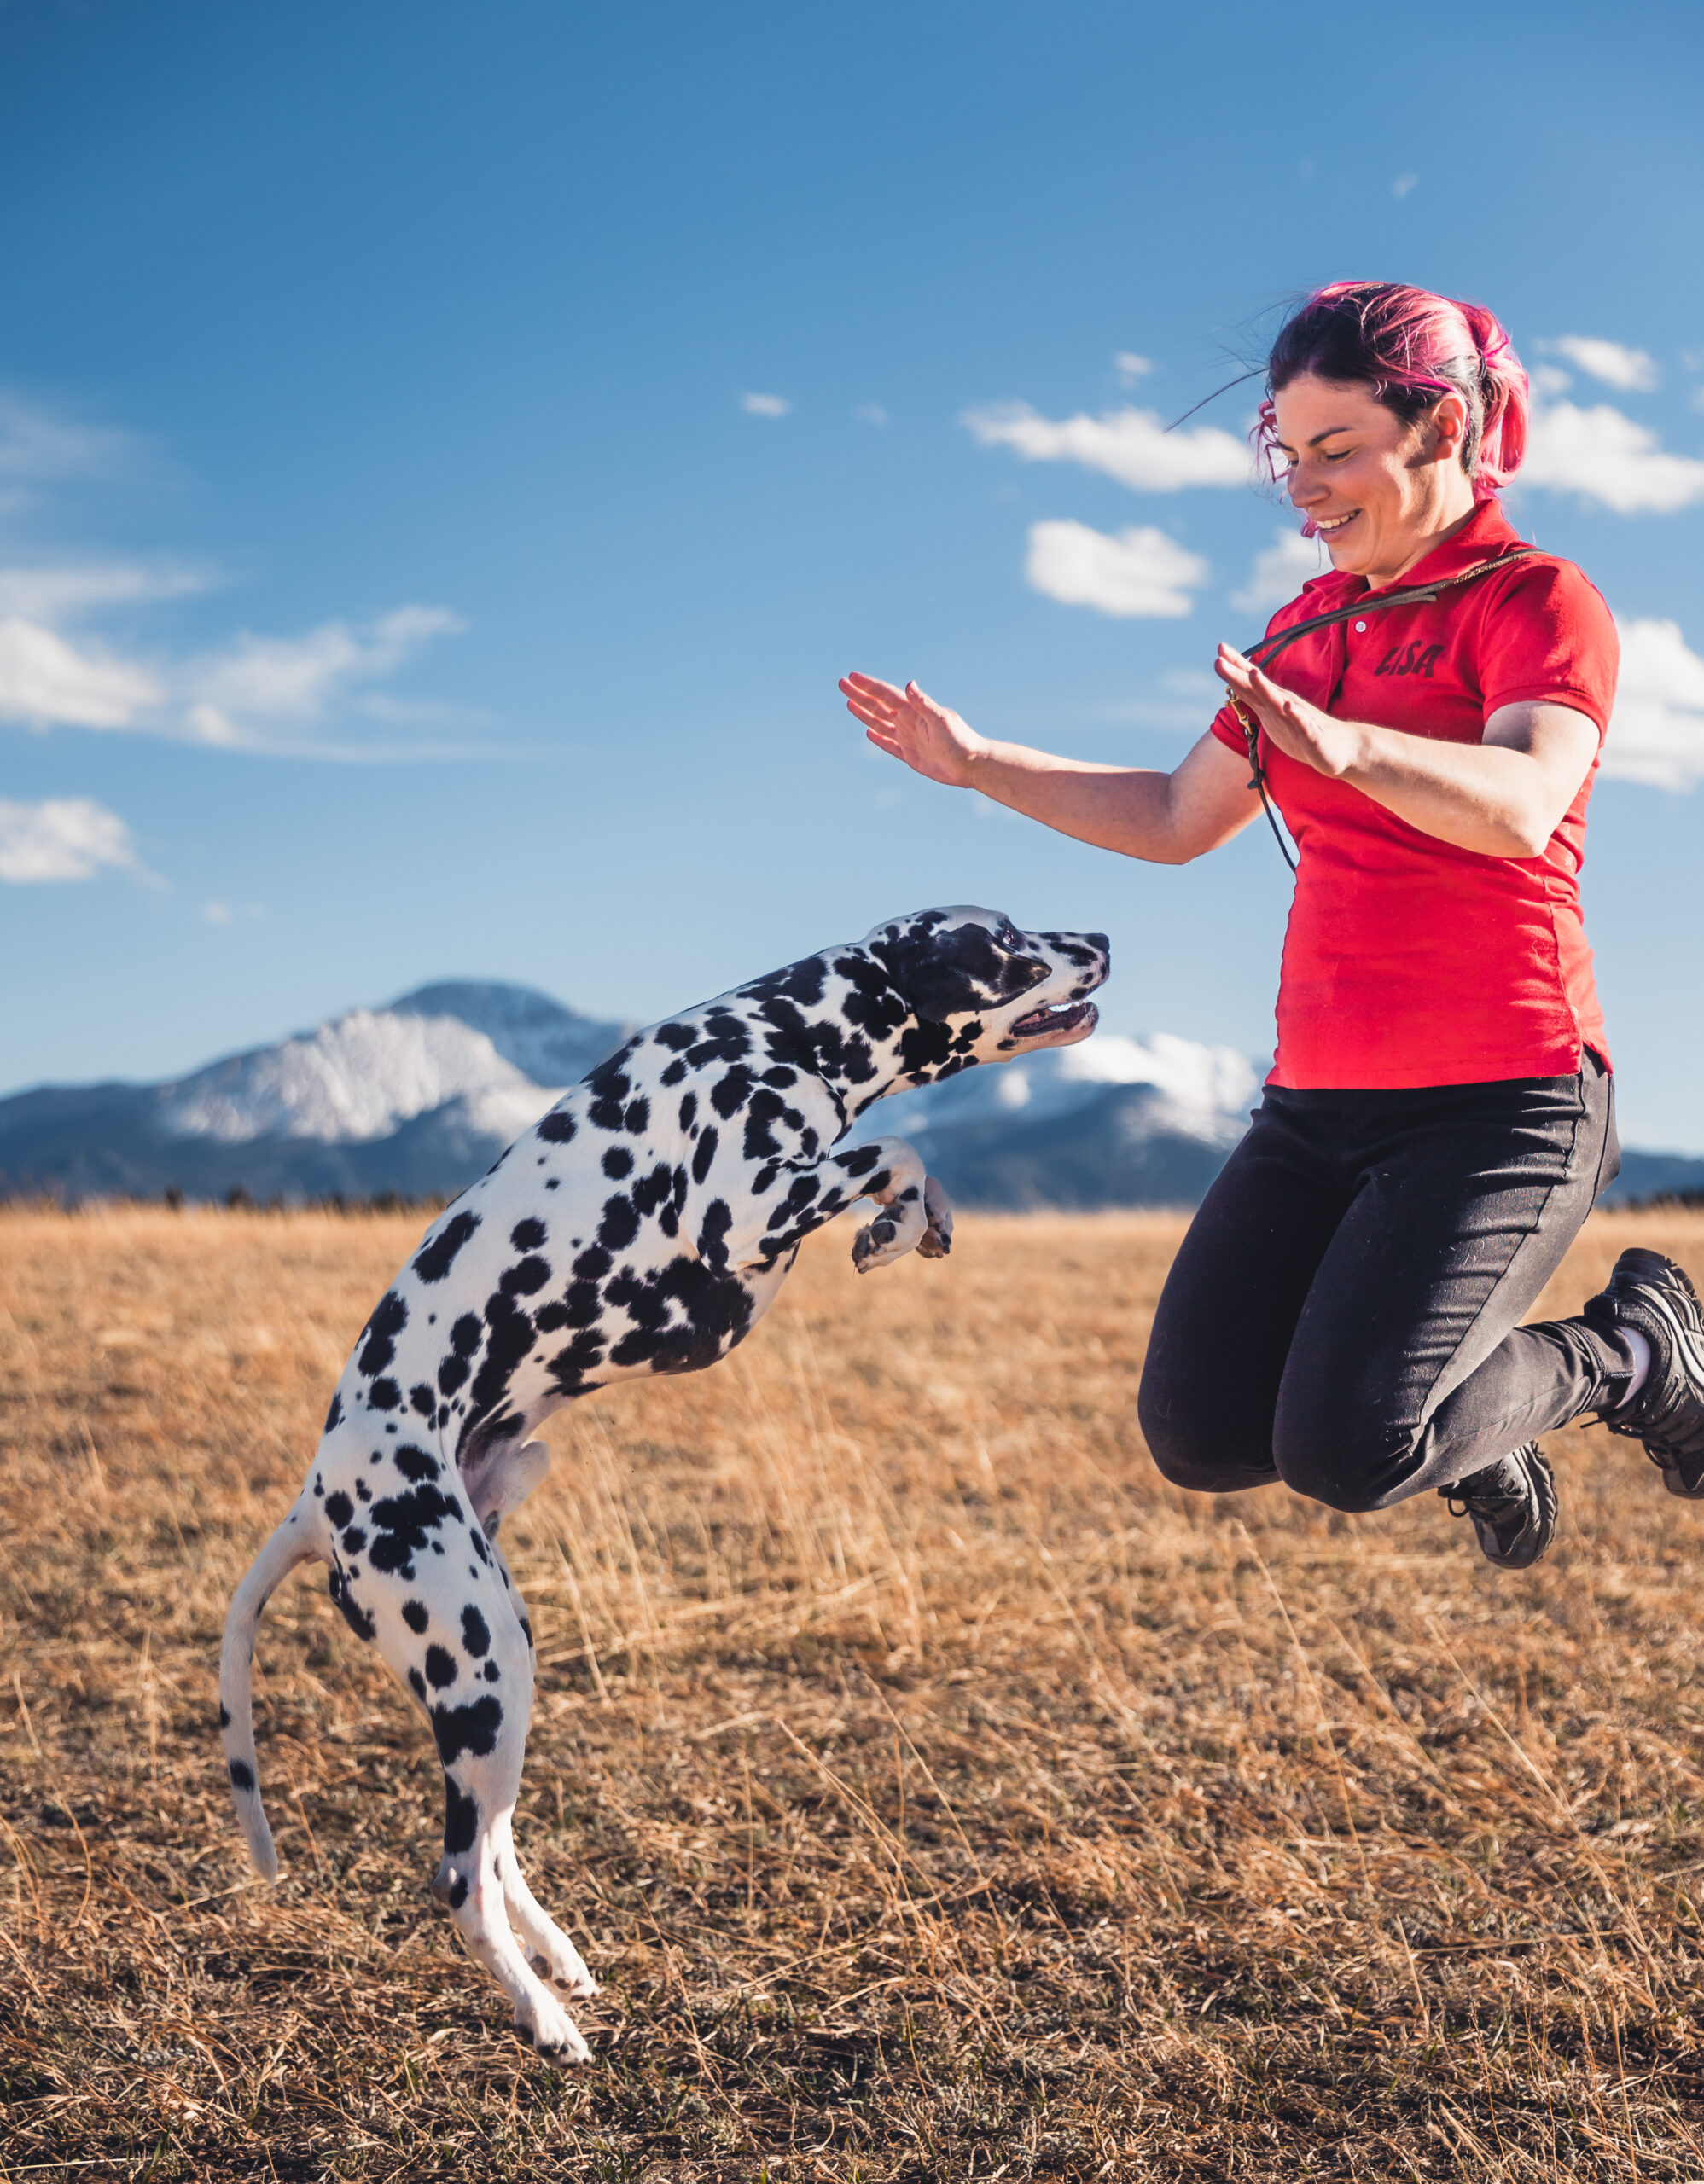 A service dog dalmatian jumps in the air in synch with trainer